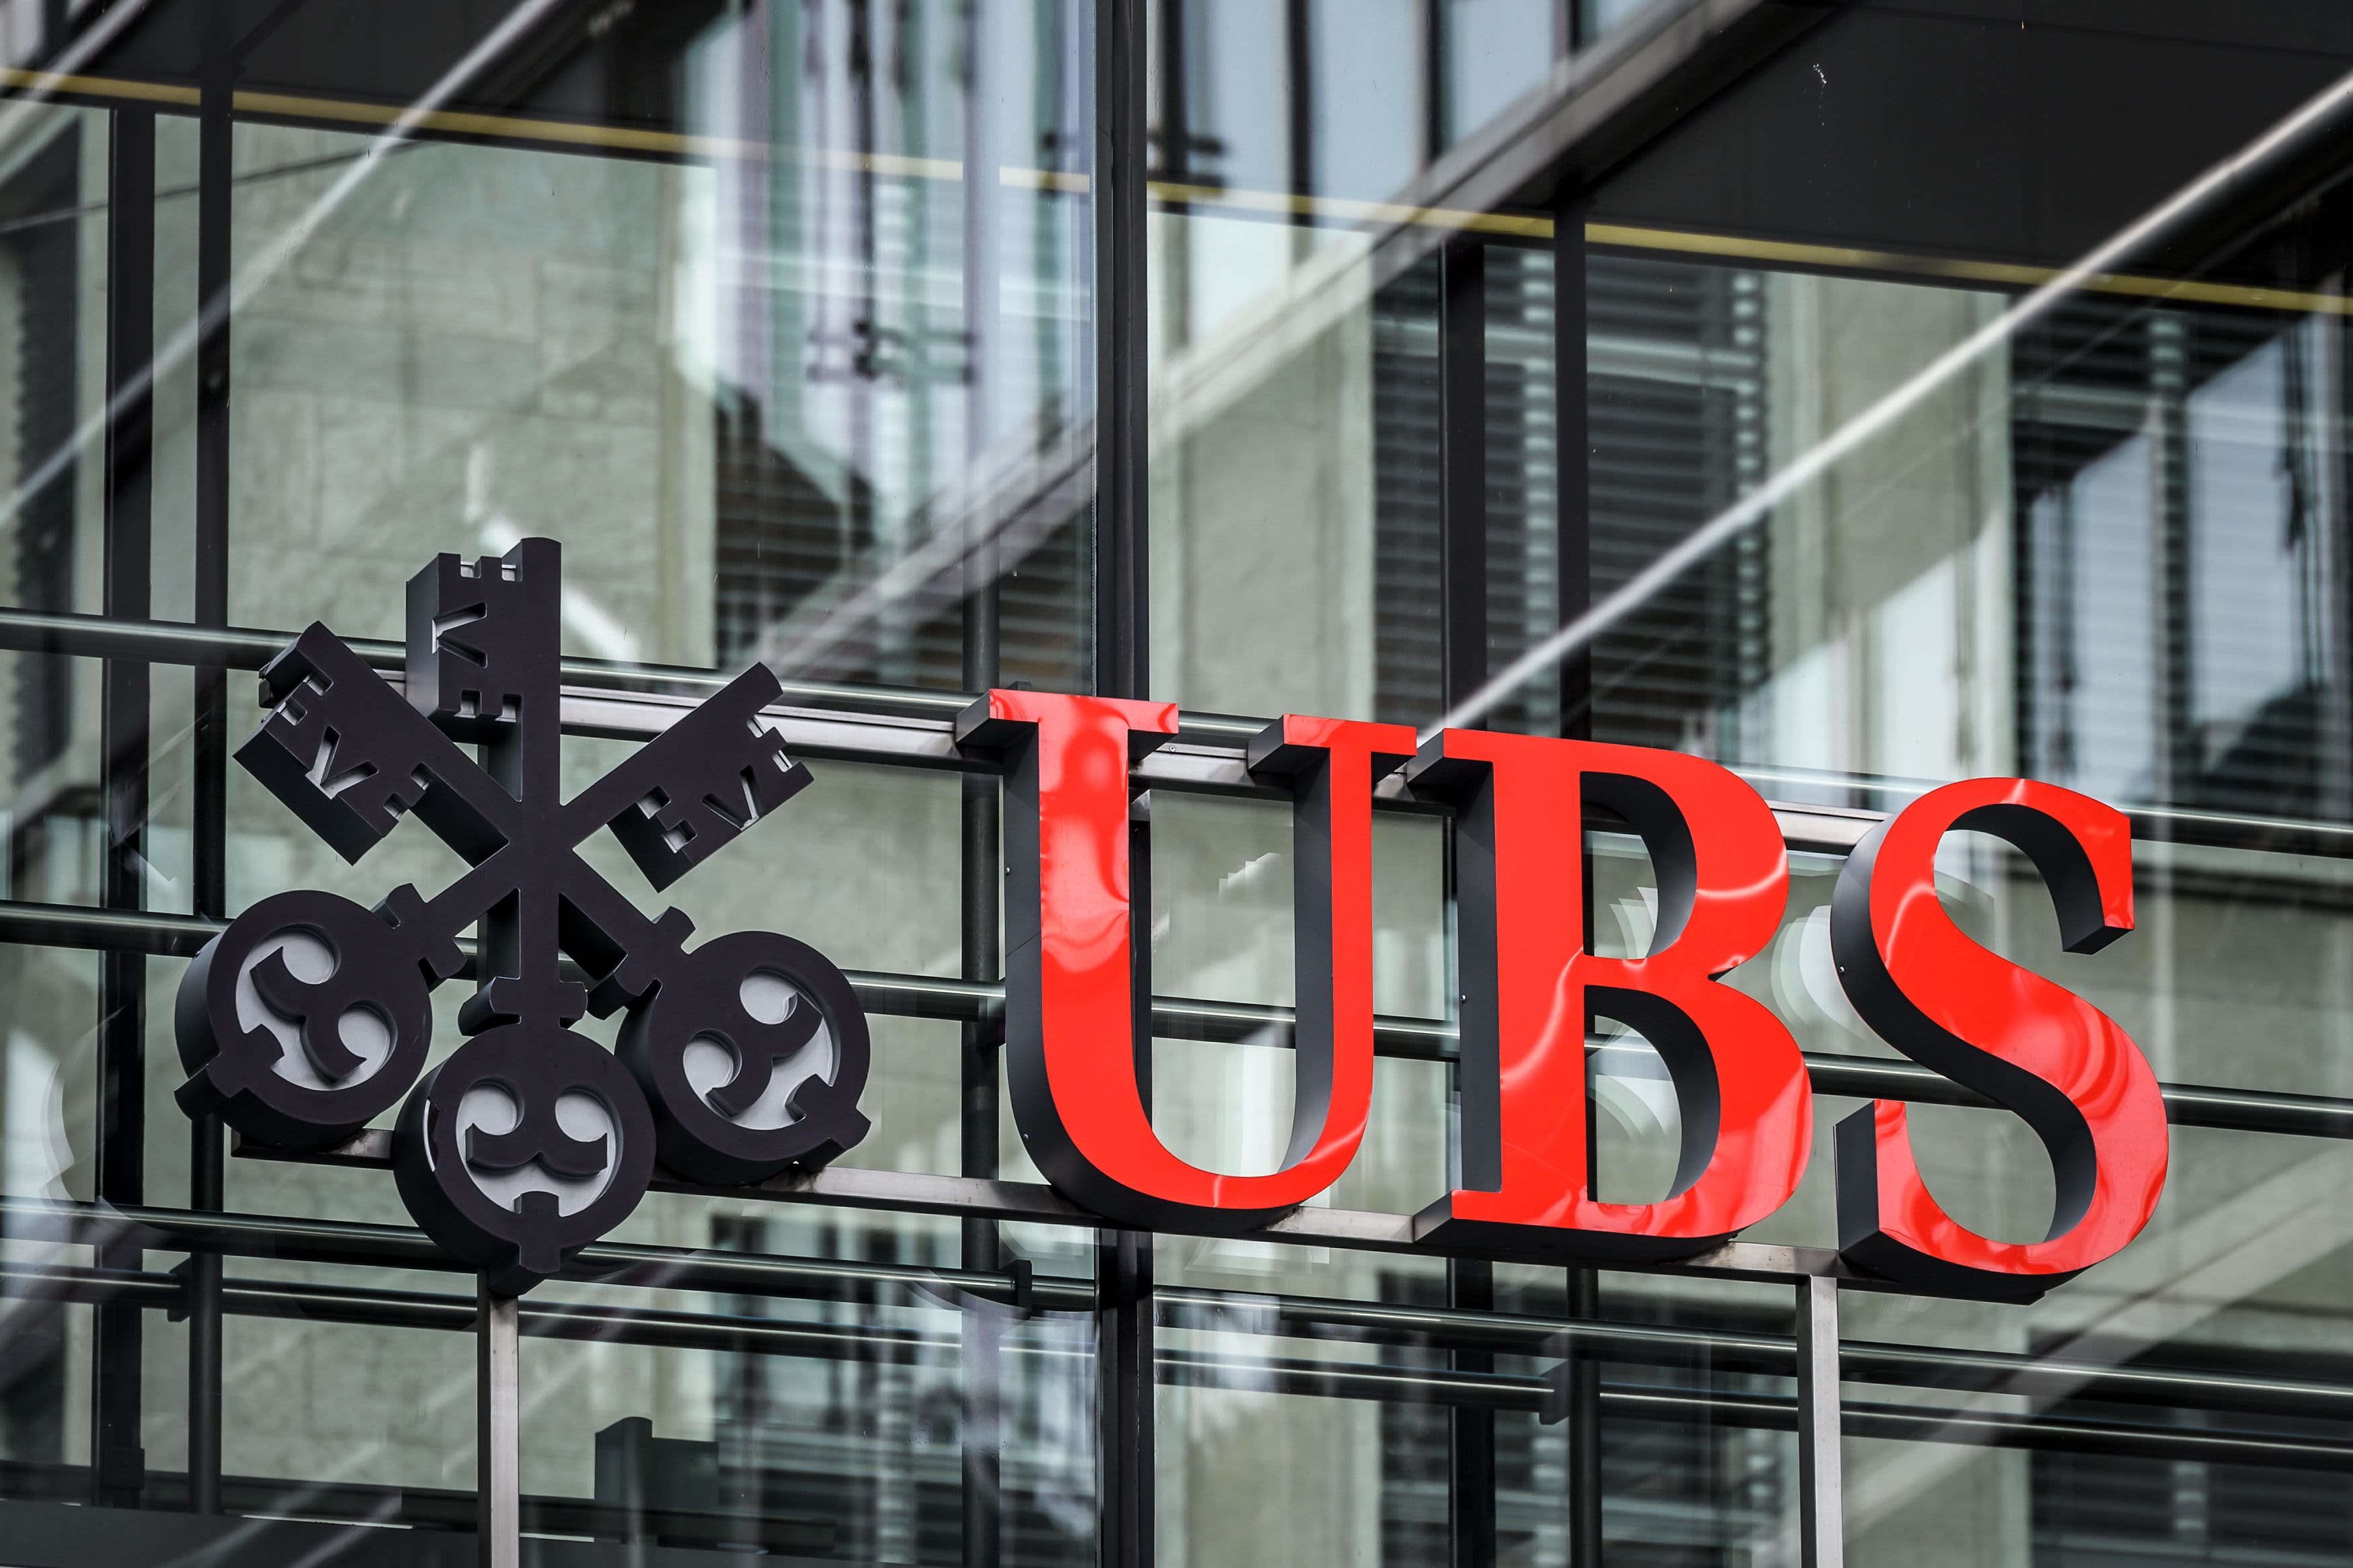 UBS just updated its 'highest conviction' stock list with picks to beat the market